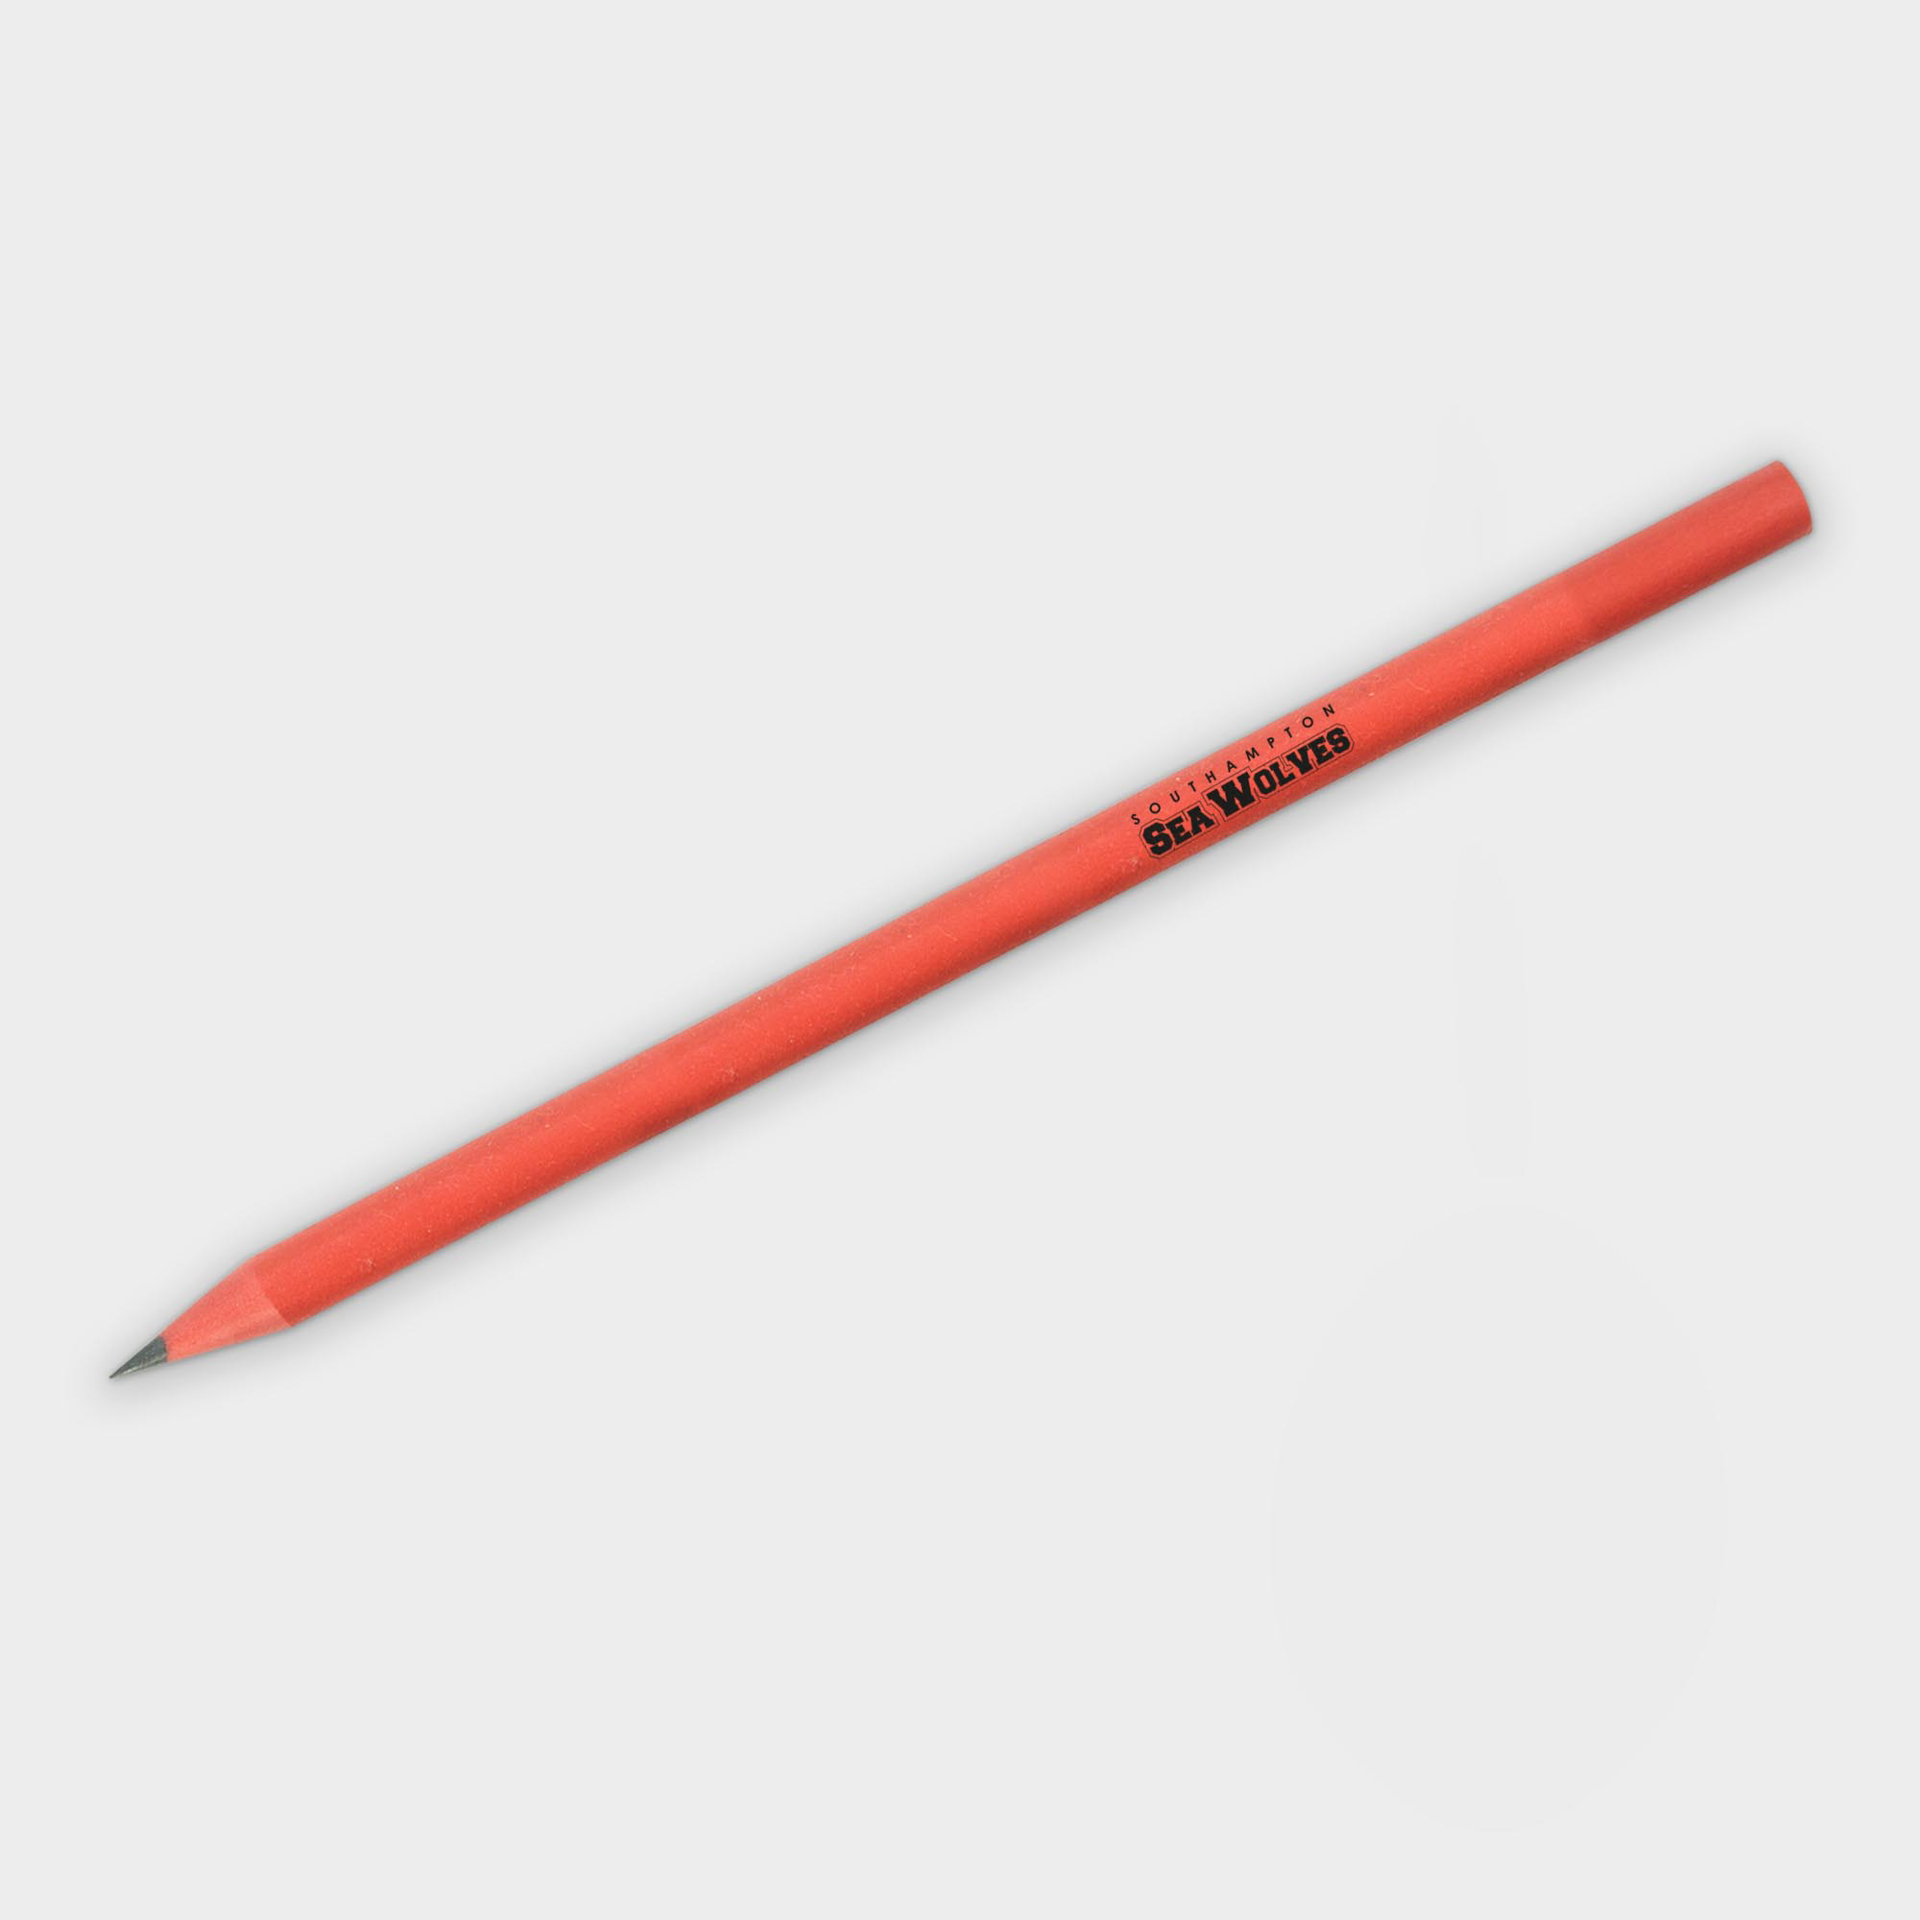 Recycled CD Pencil in red with 1 colour print